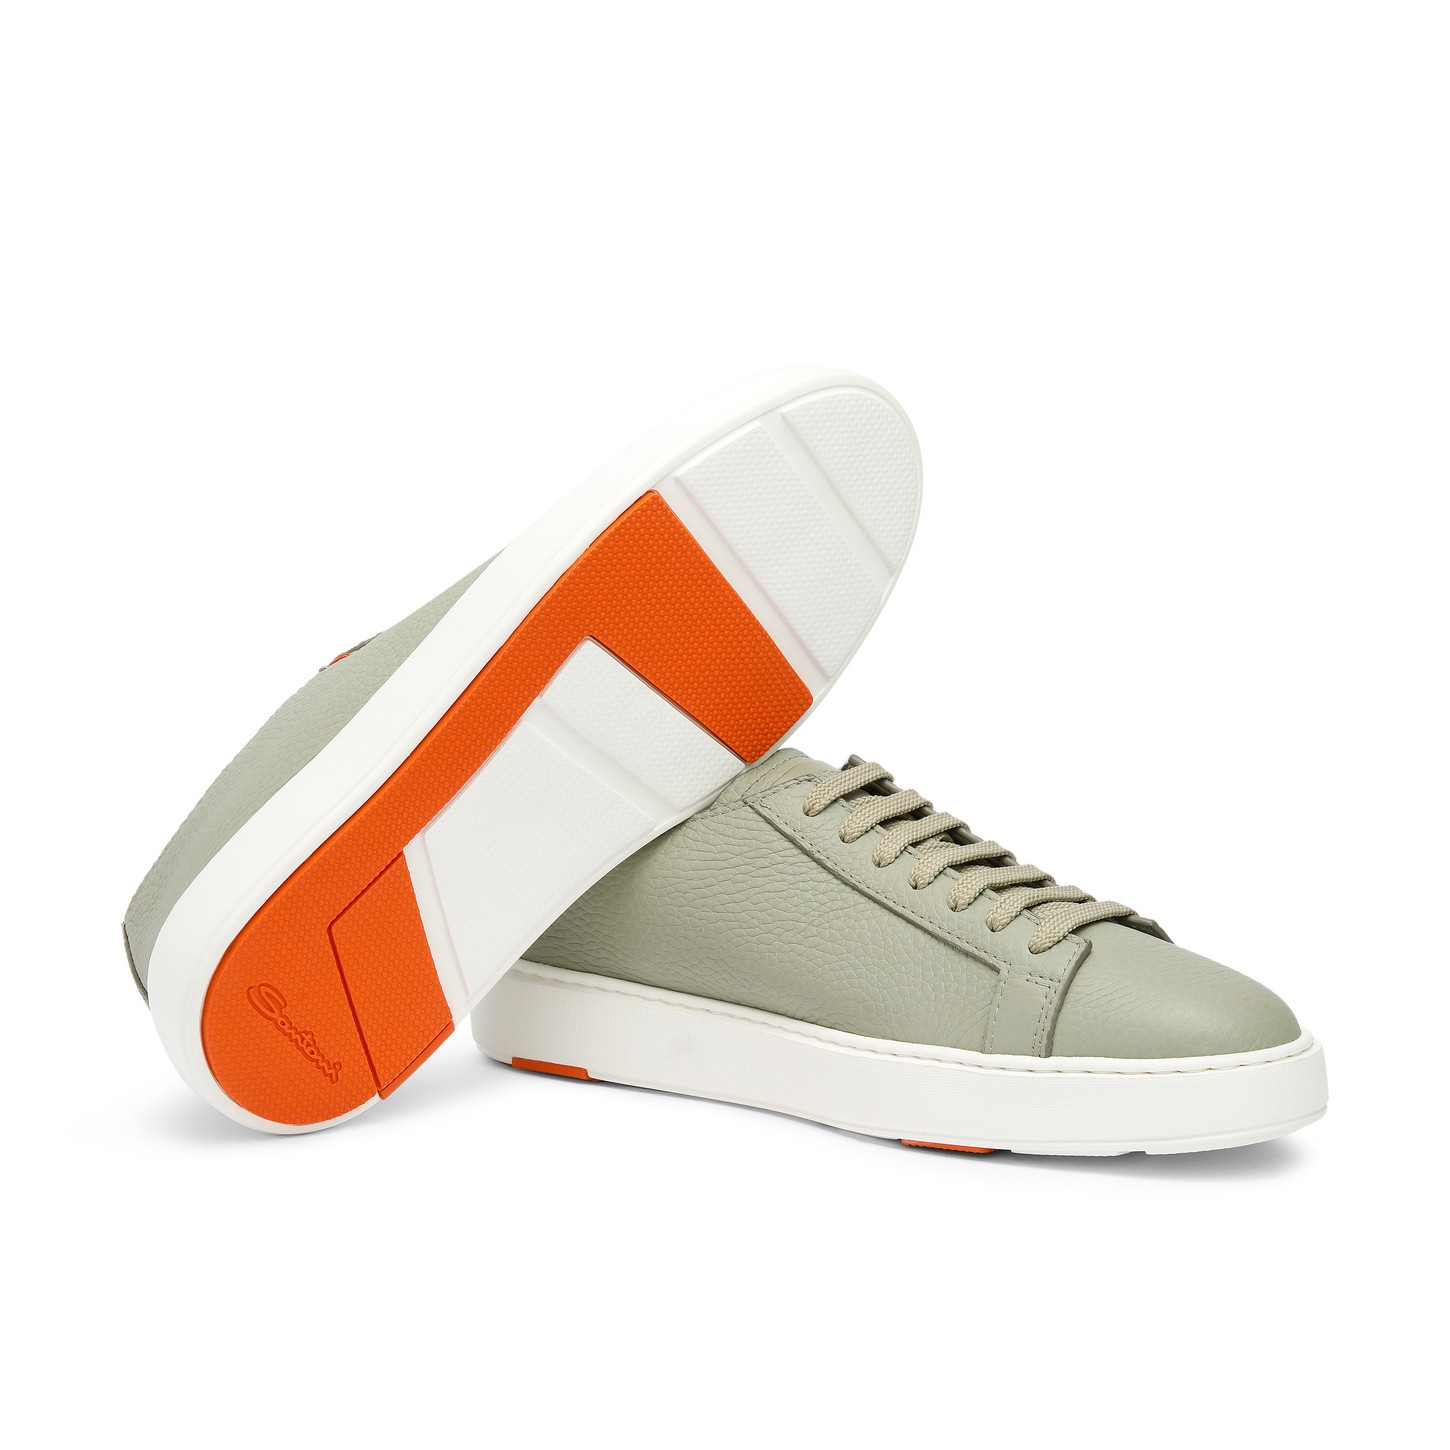 Men's green tumbled leather sneaker - 4